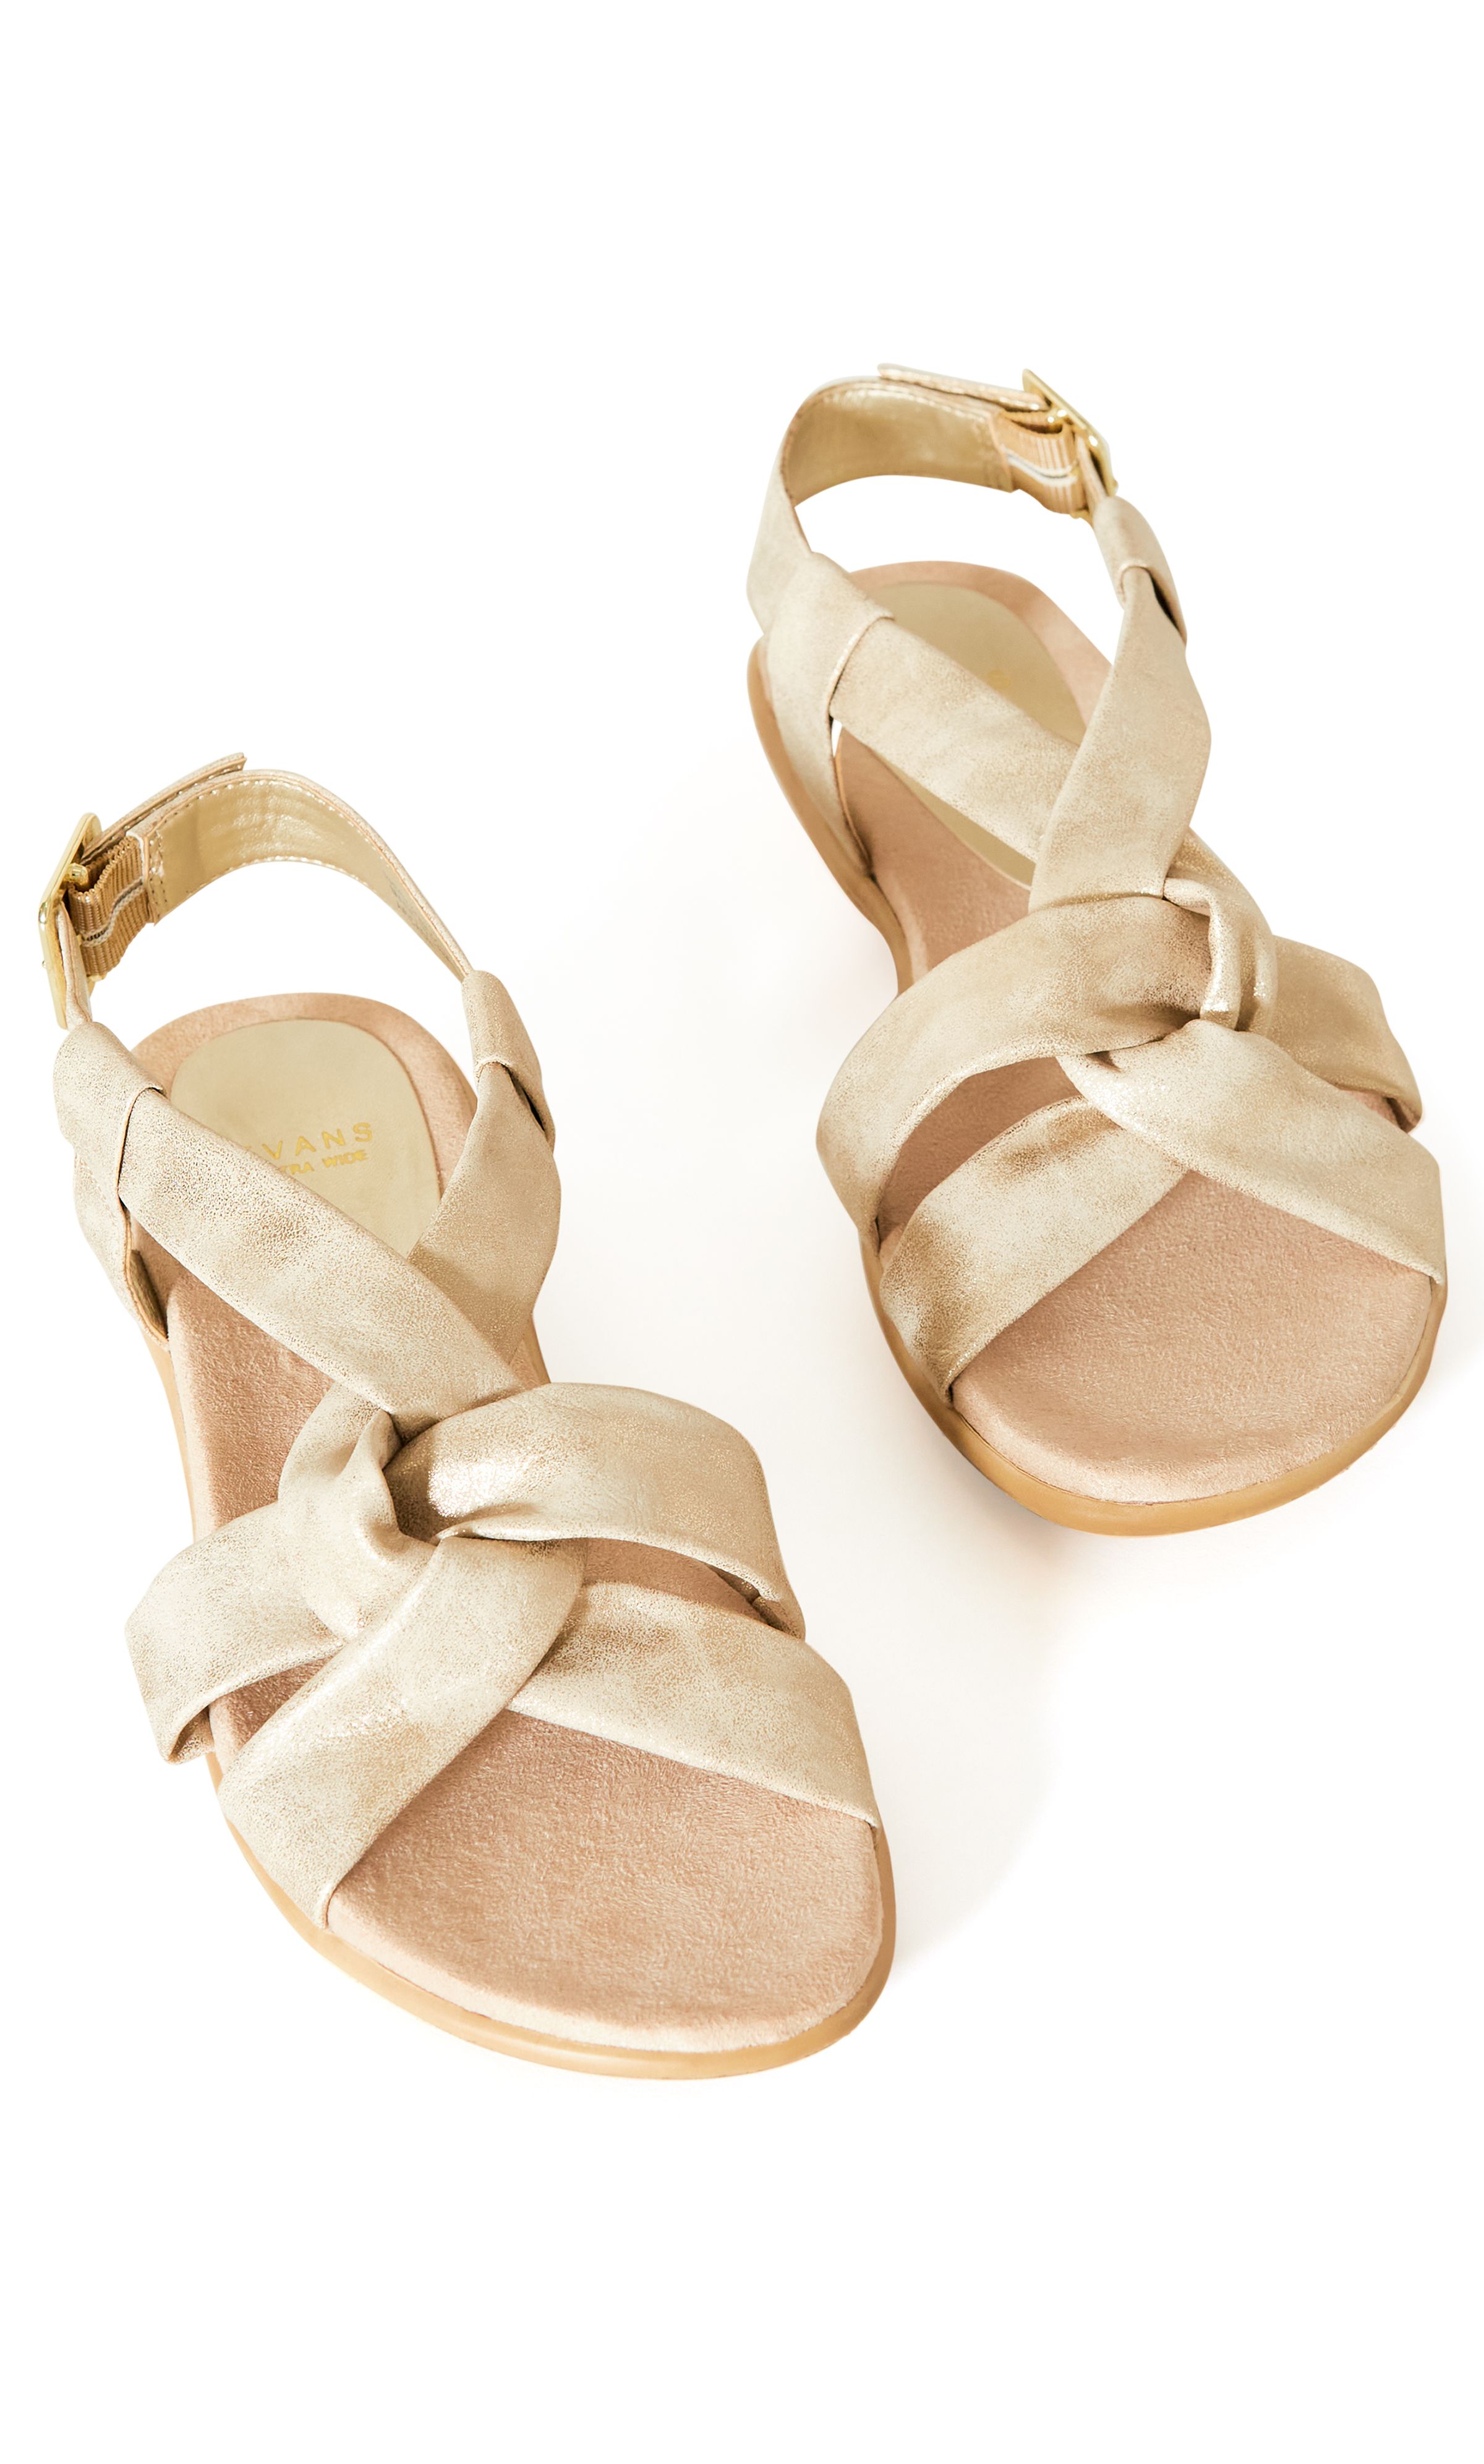 The pretty sandals to add to your collection. Twist front detailing keeps these on-trend, whilst an on-trend metallic finish will have you wearing these on-repeat. 100% TEXTILE. WIPE CLEAN ONLY.